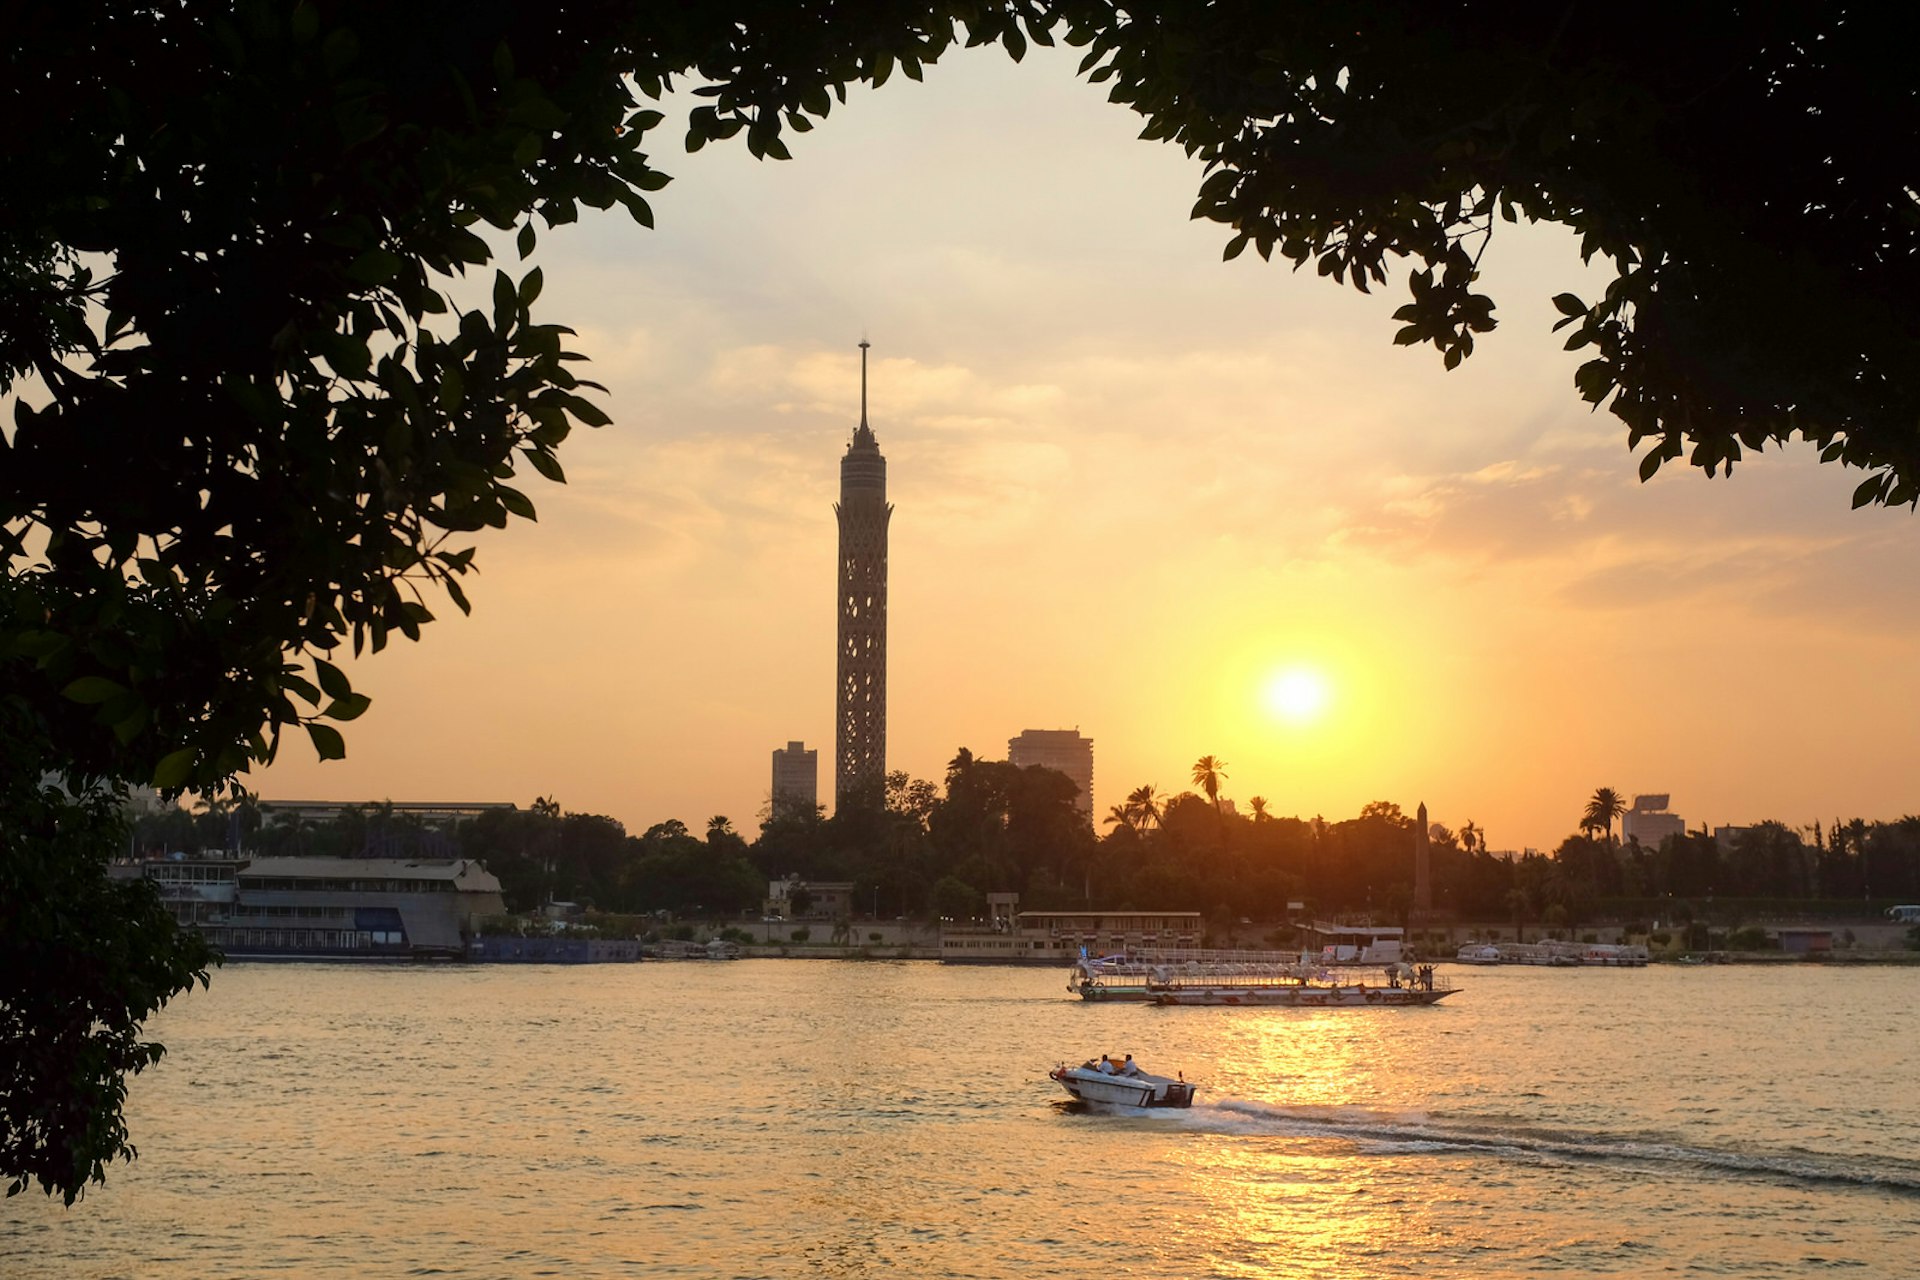 Sunset over Nile River - Cairo, Egypt. Image by Orhan Cam / Shutterstock